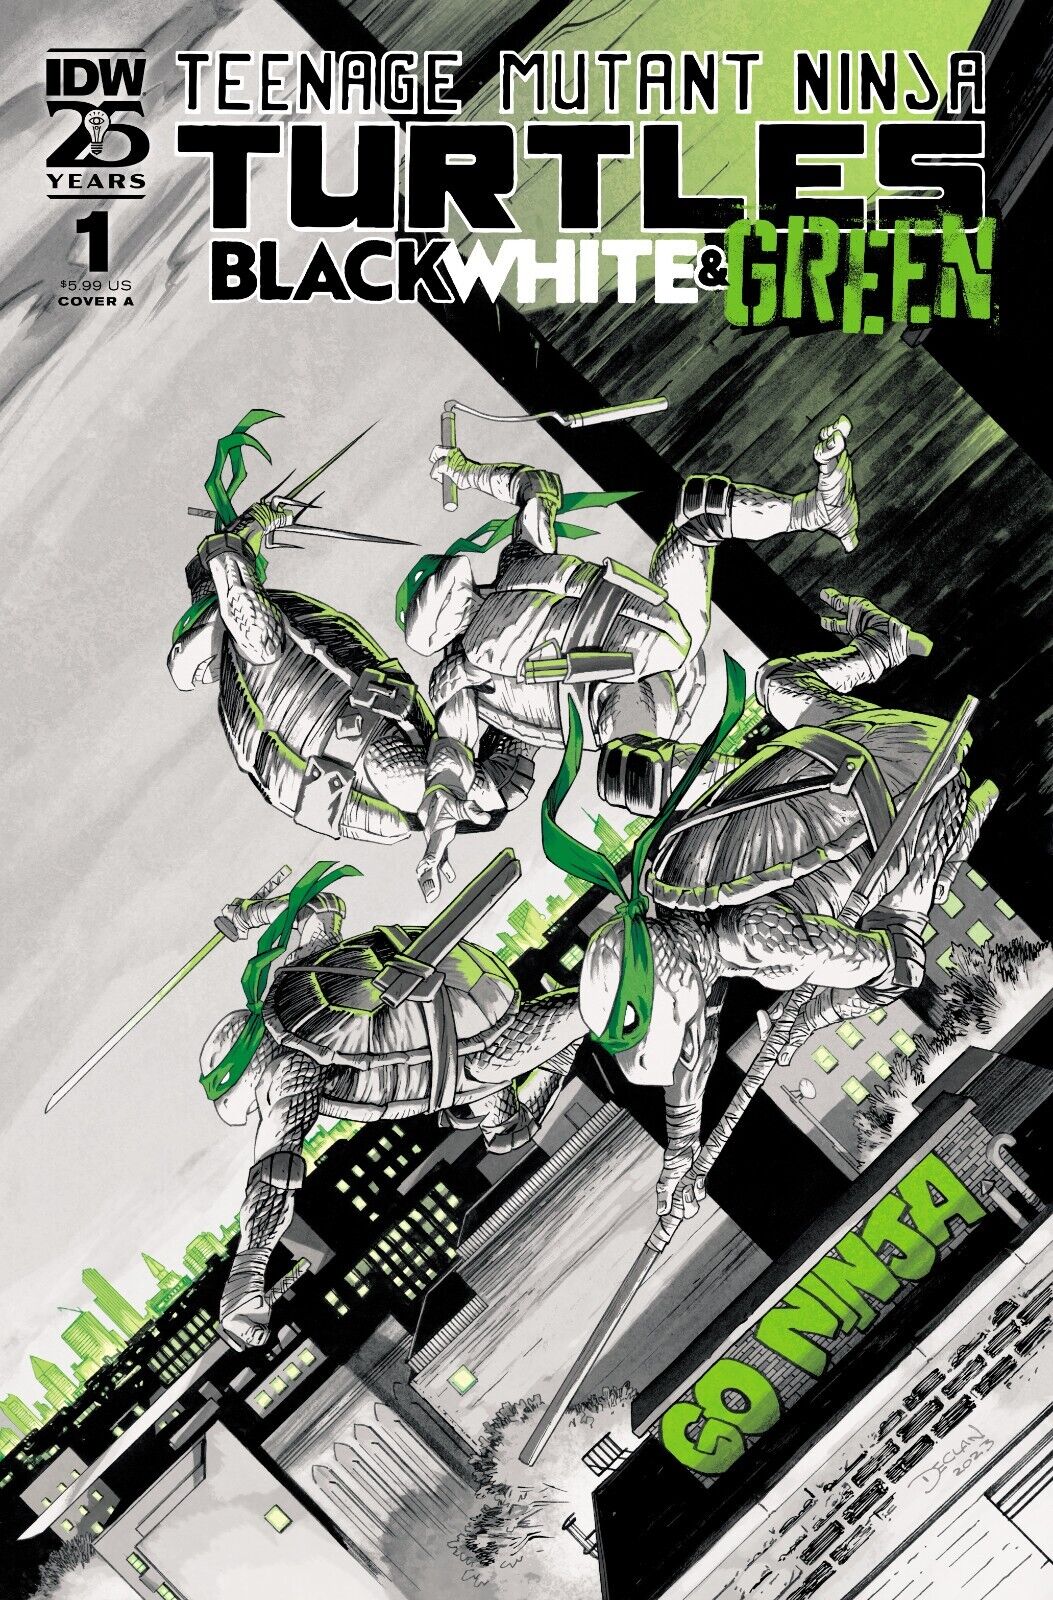 Teenage Mutant Ninja Turtles: Black, White, and Green #1  Cover Select  IN HAND